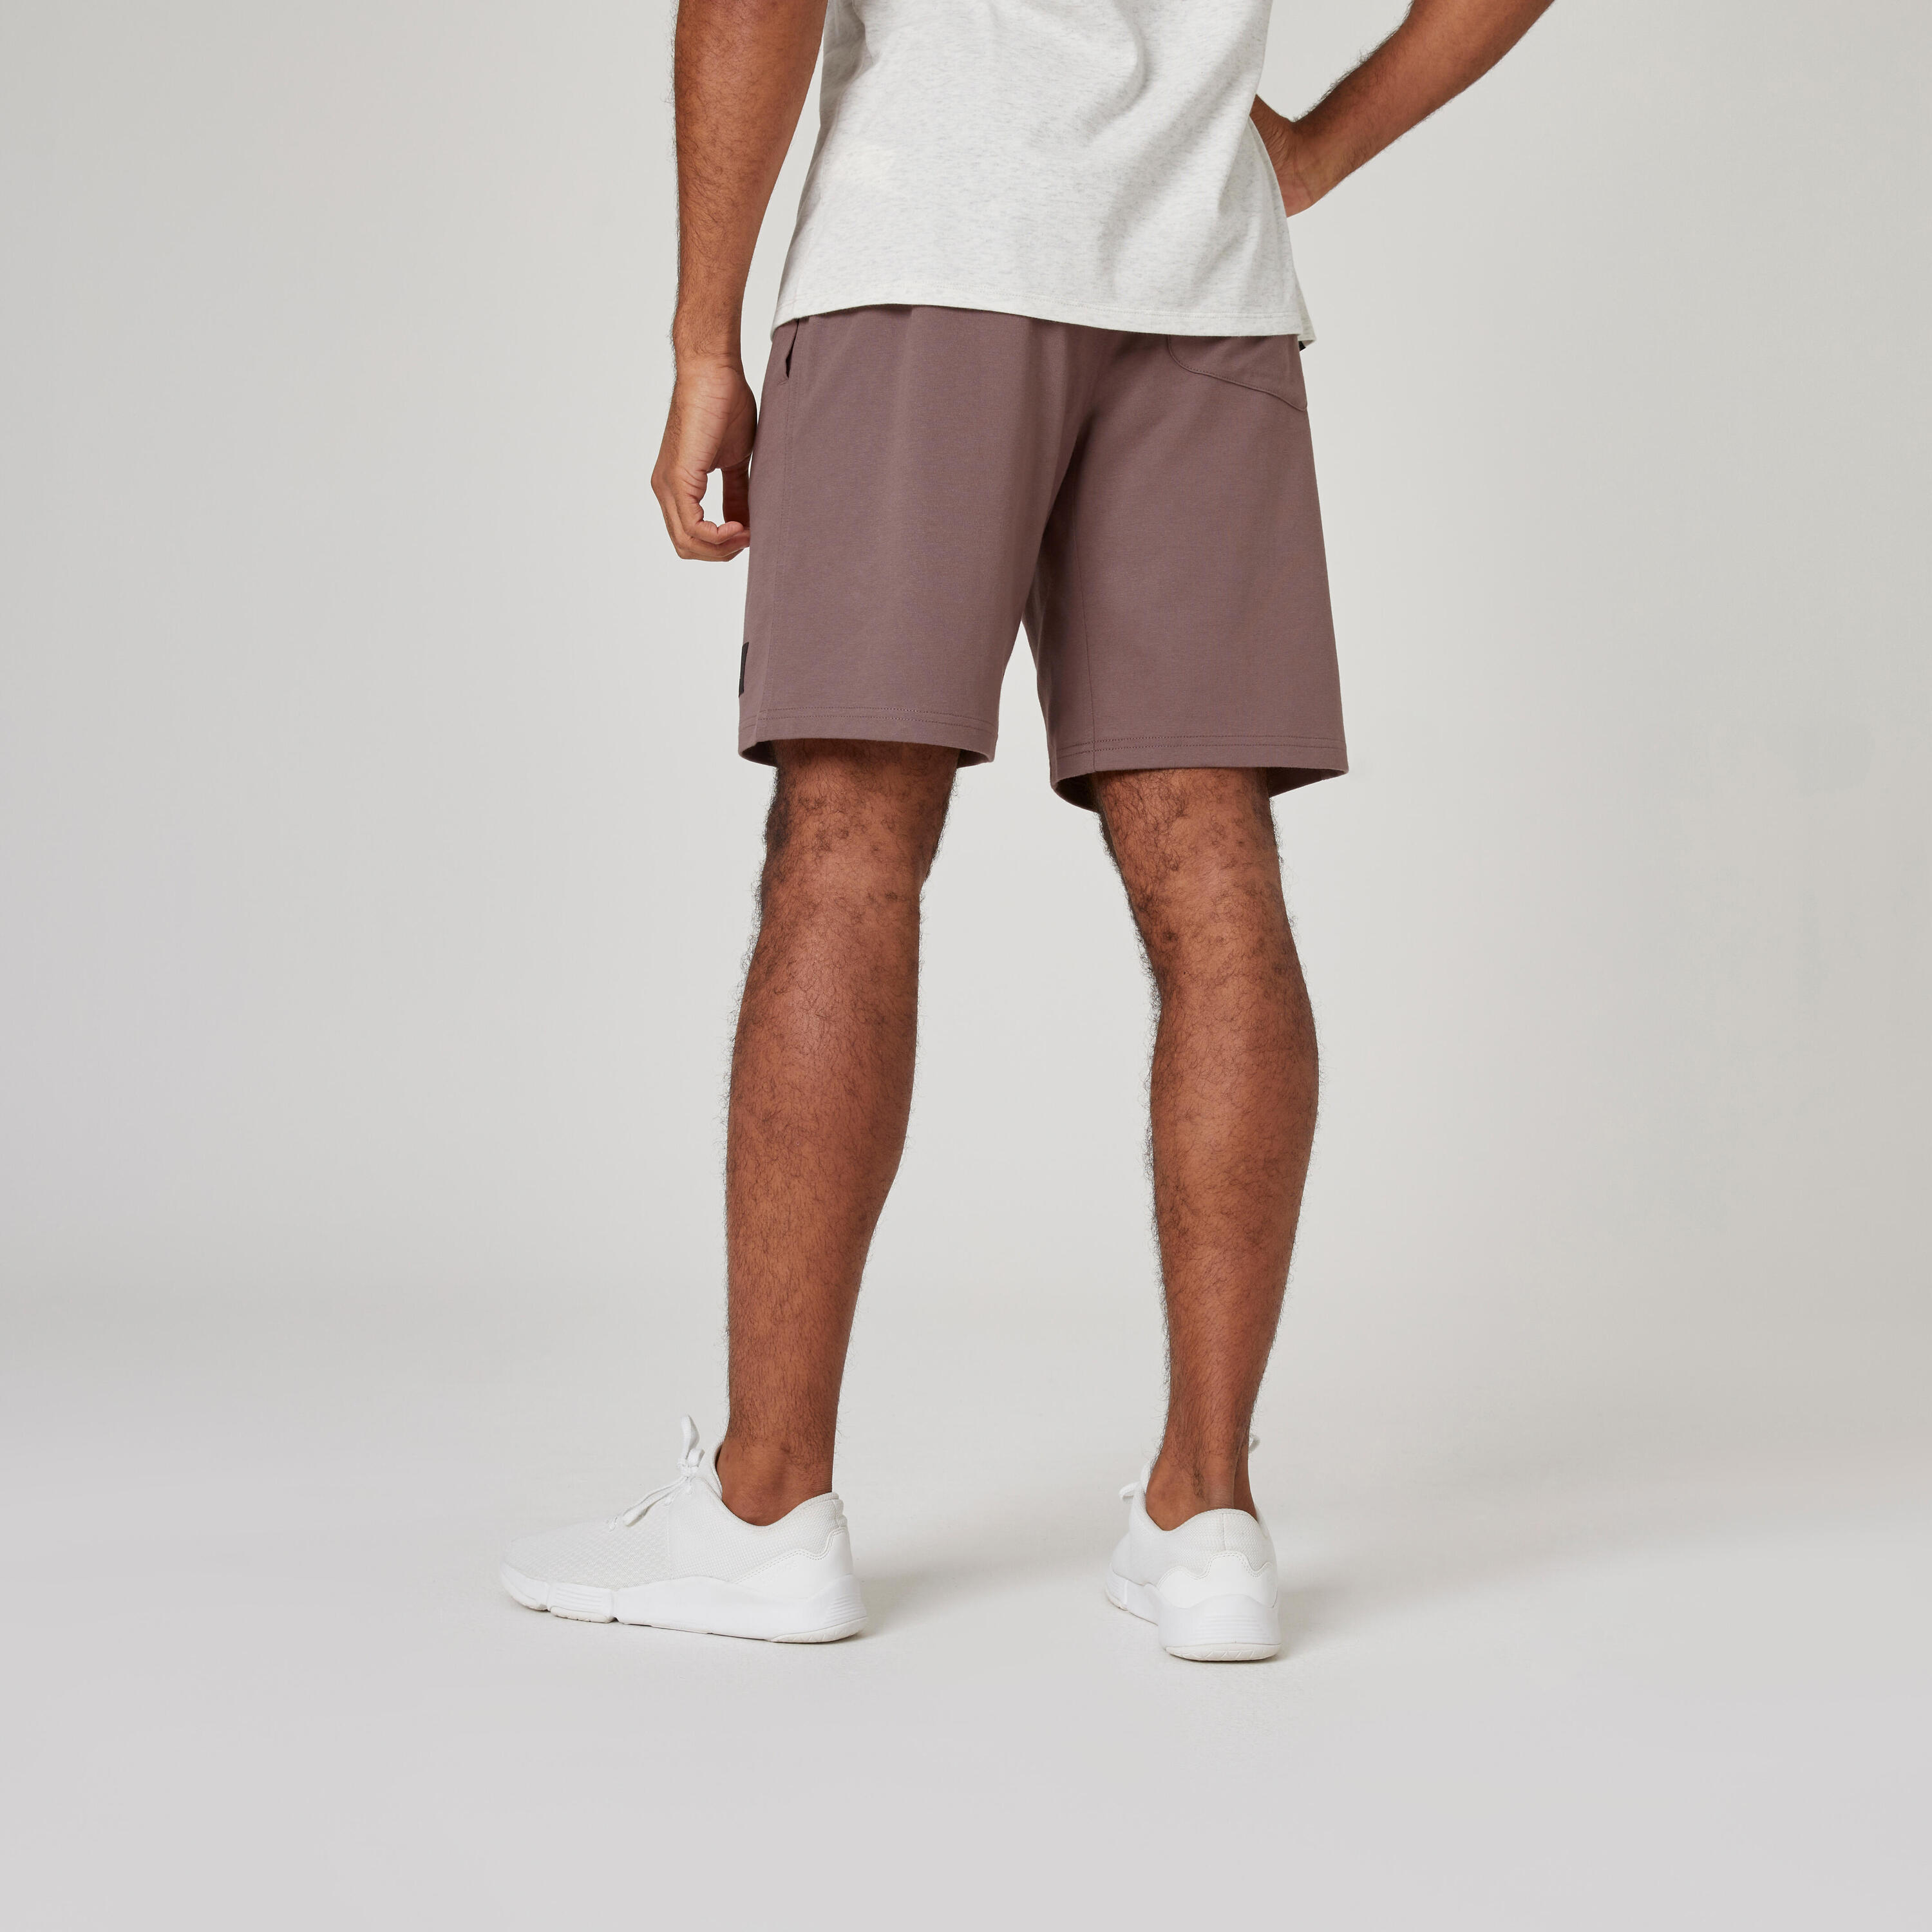 Men's Straight-Cut Cotton Fitness Shorts with Pocket - Grey 2/7